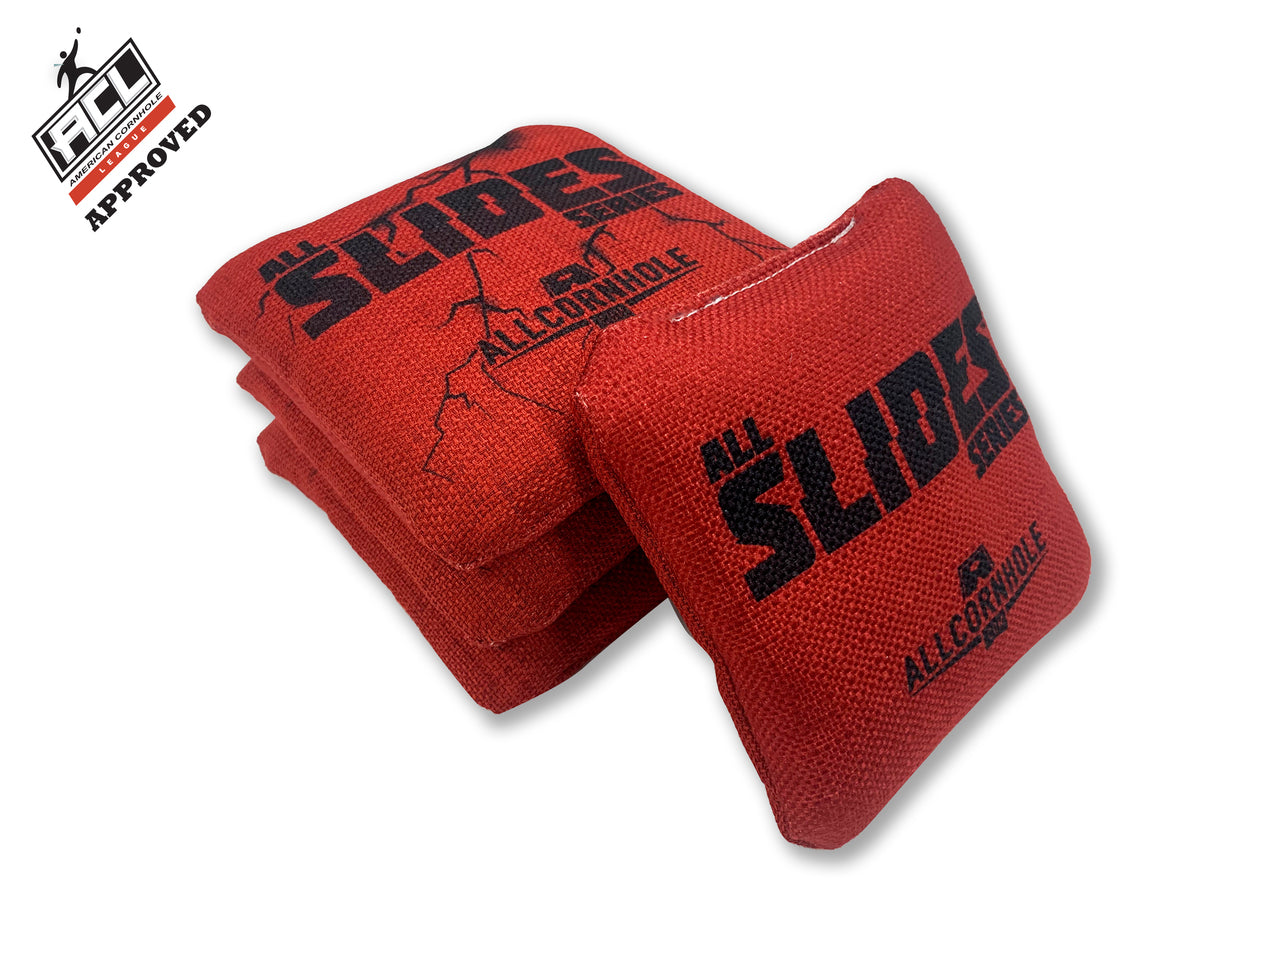 All Slides - ACL Approved Cornhole Bags (Set of 4 Bags)